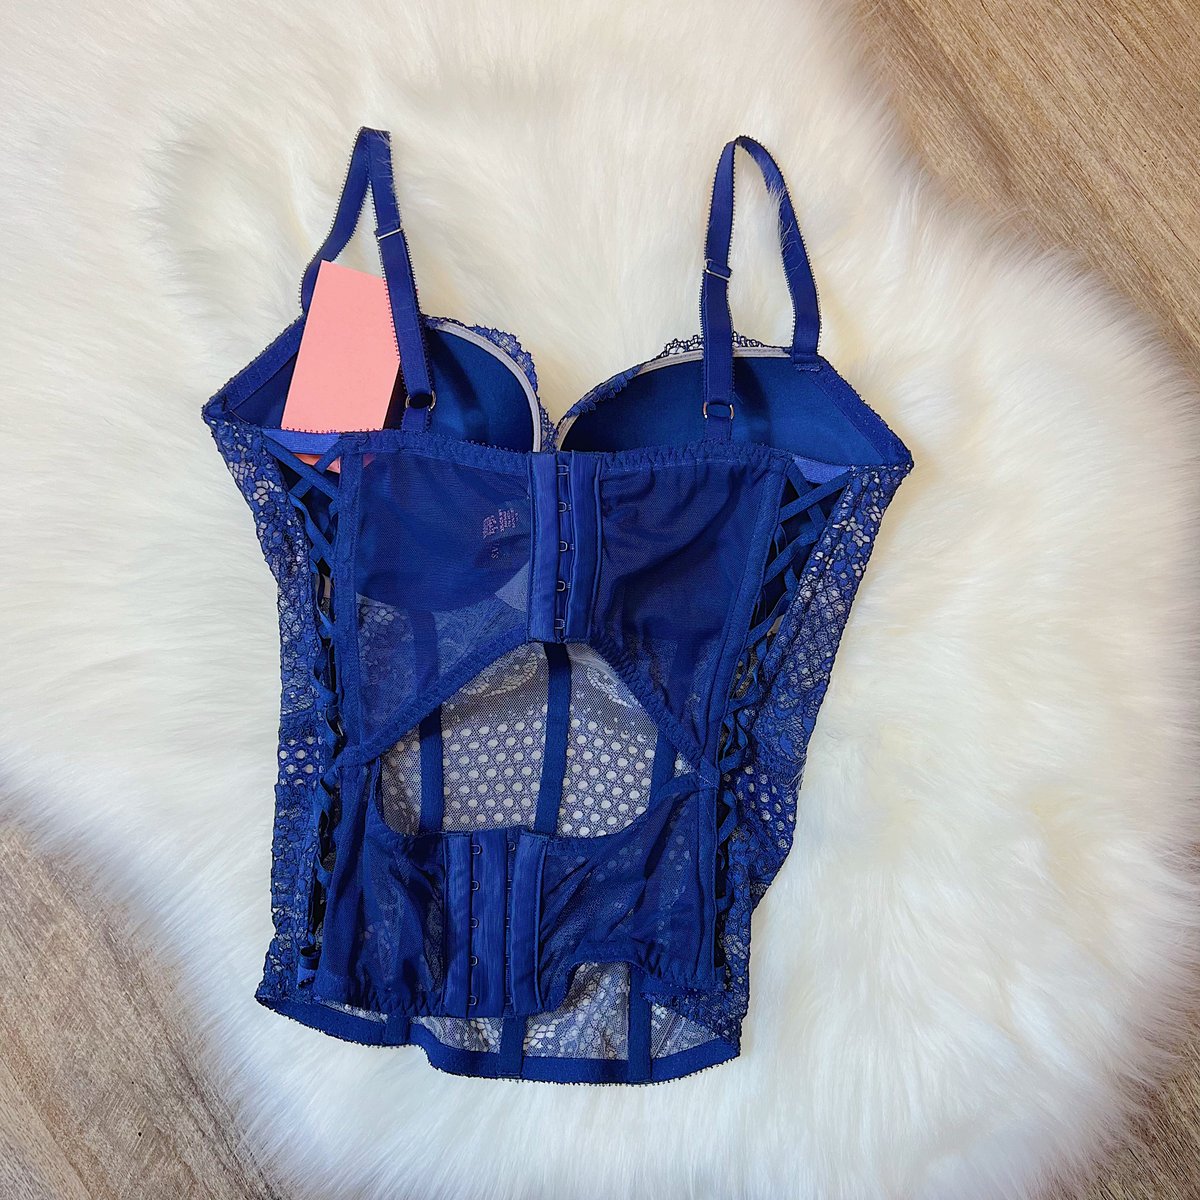 Victoria's Secret Like NEW Victoria Secret Dream Angels Baby Blue High Neck  Lace Bralette Bra. Size large - $15 - From Brittany